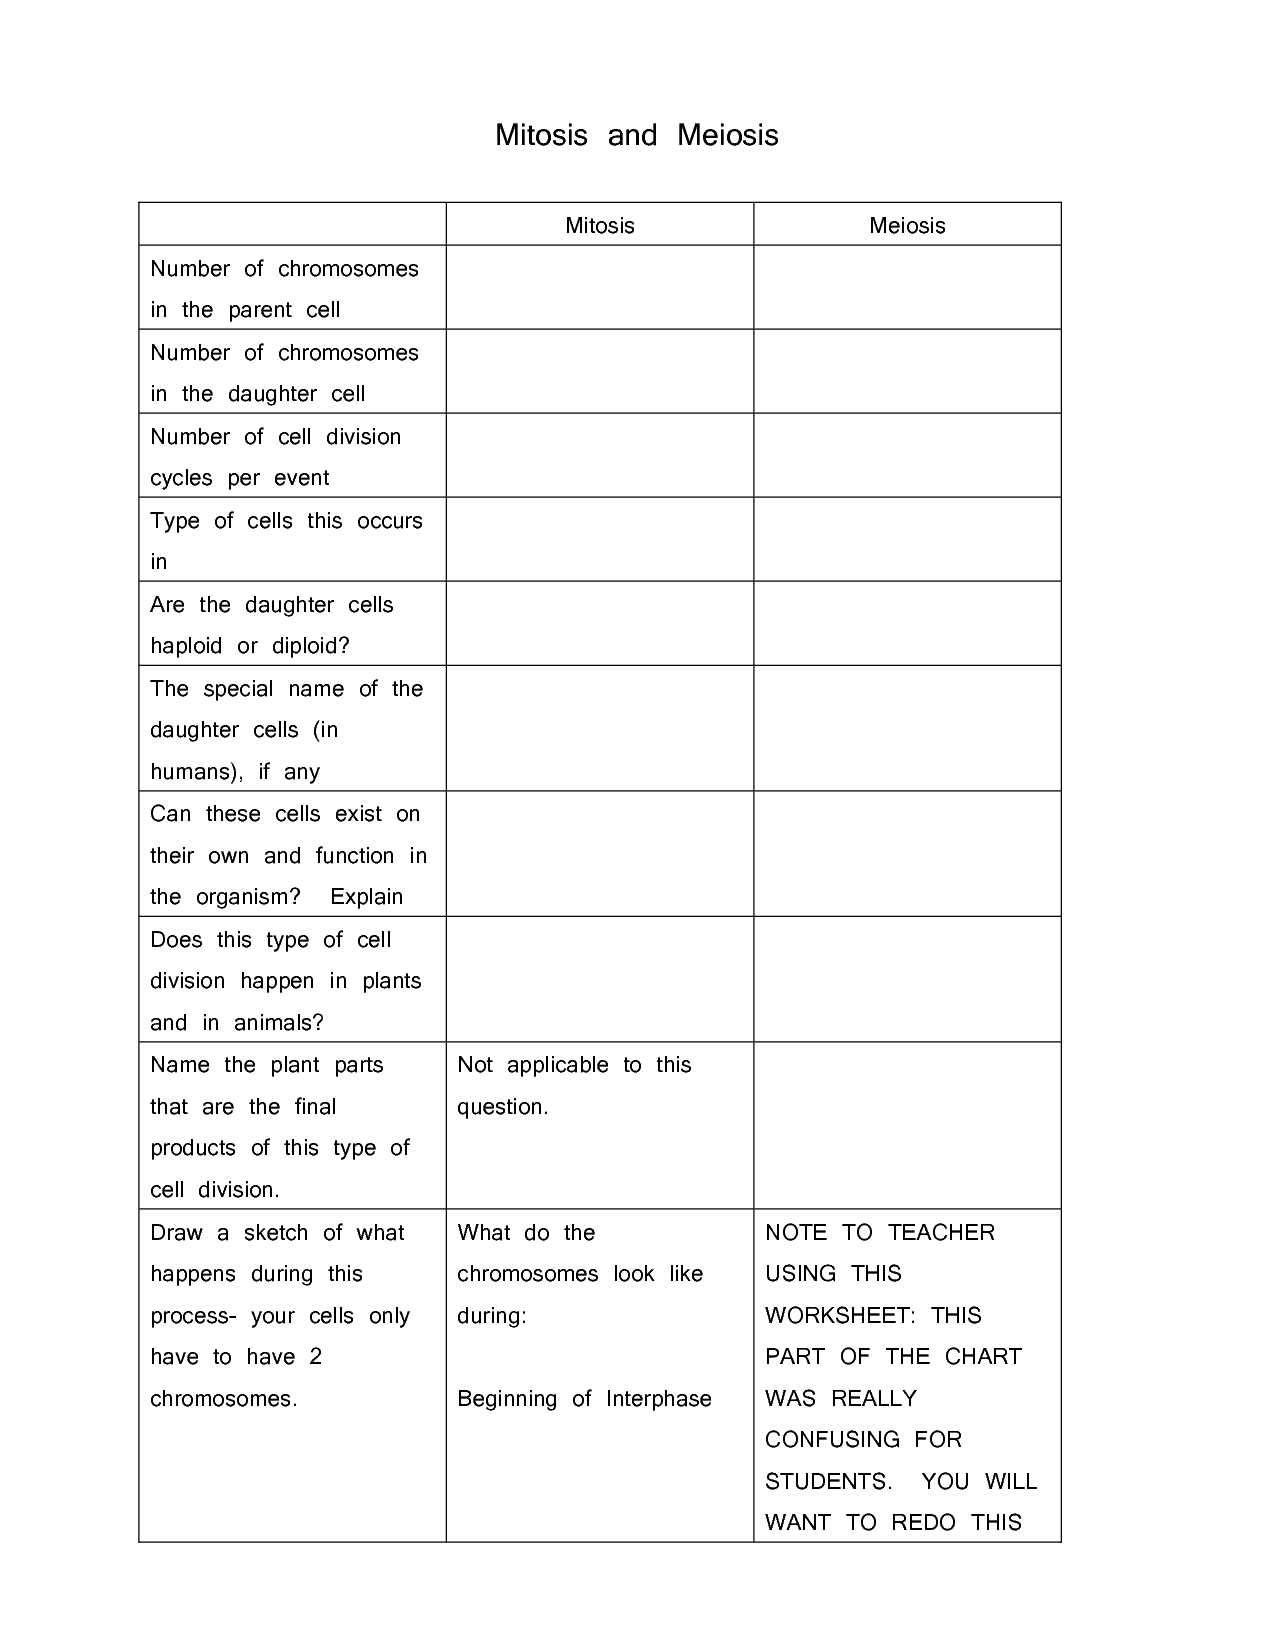 mitosis-and-meiosis-worksheet-answer-key-15-best-images-of-phases-of-meiosis-worksheet